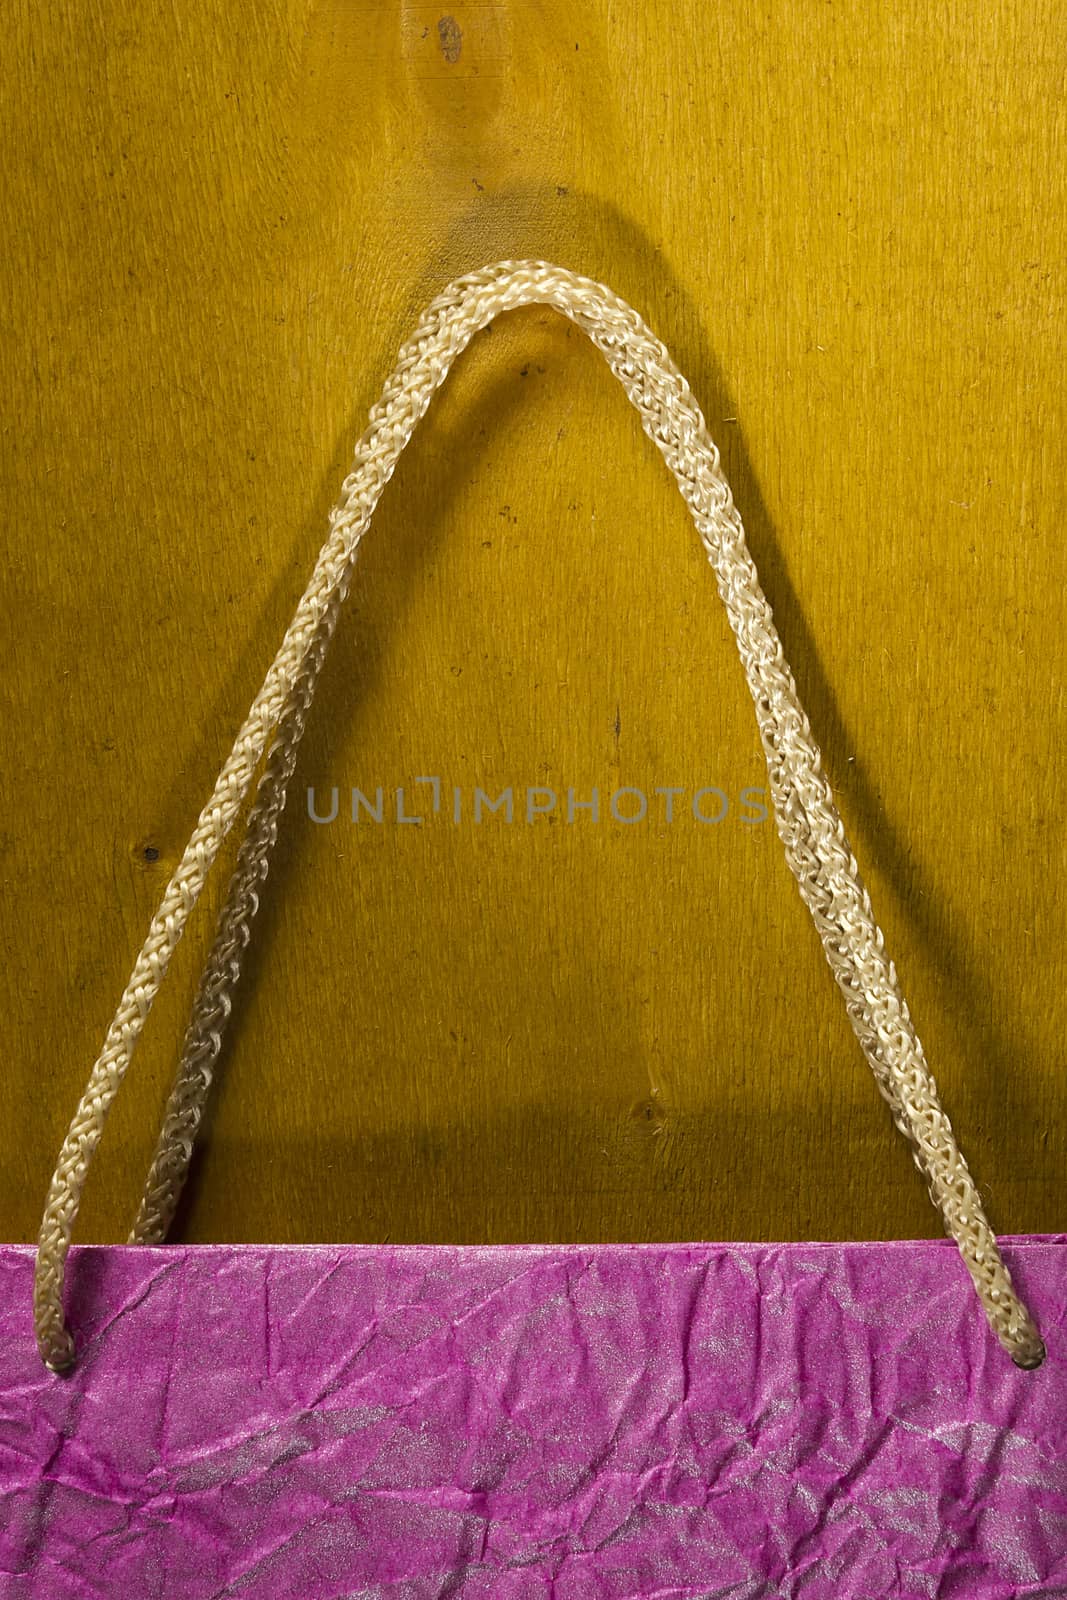 Rope handles from a paper bag on a wooden background